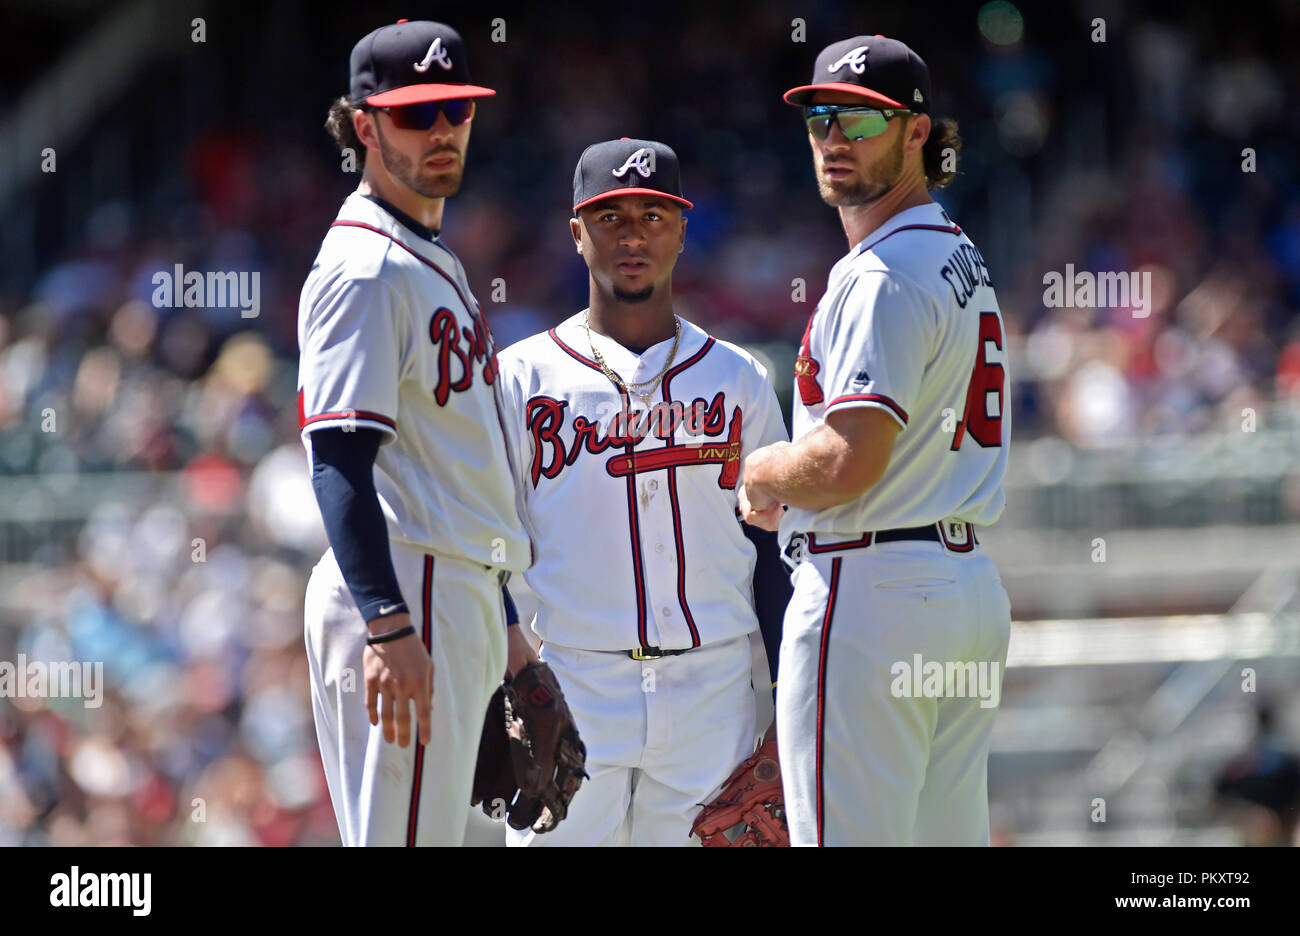 Atlanta, GA, USA. 15th Sep, 2018. Atlanta Braves infielders Dansby Swanson  (left), Ozzie Albies (center) and Charlie Culberson (right) meet during a  play review in the first inning of a MLB game